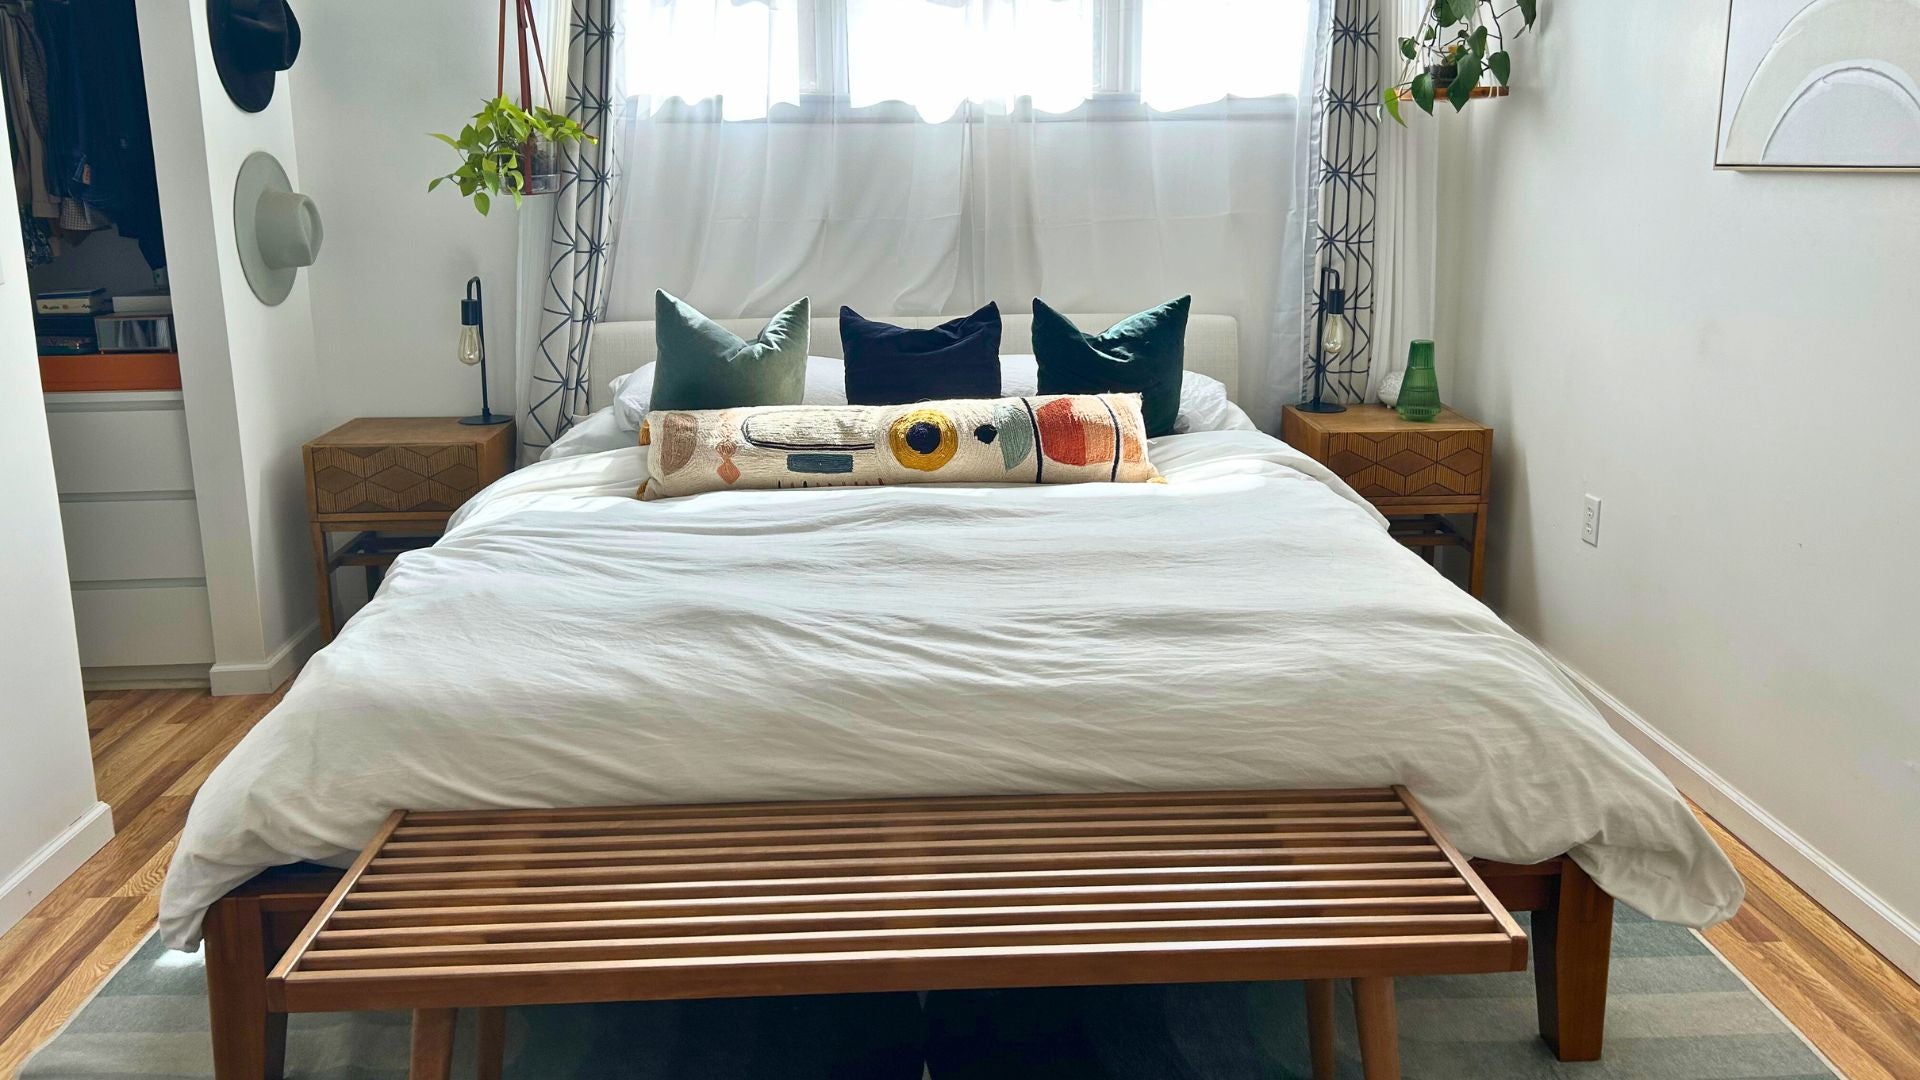 boho bedroom with solid wood bench at end of bed